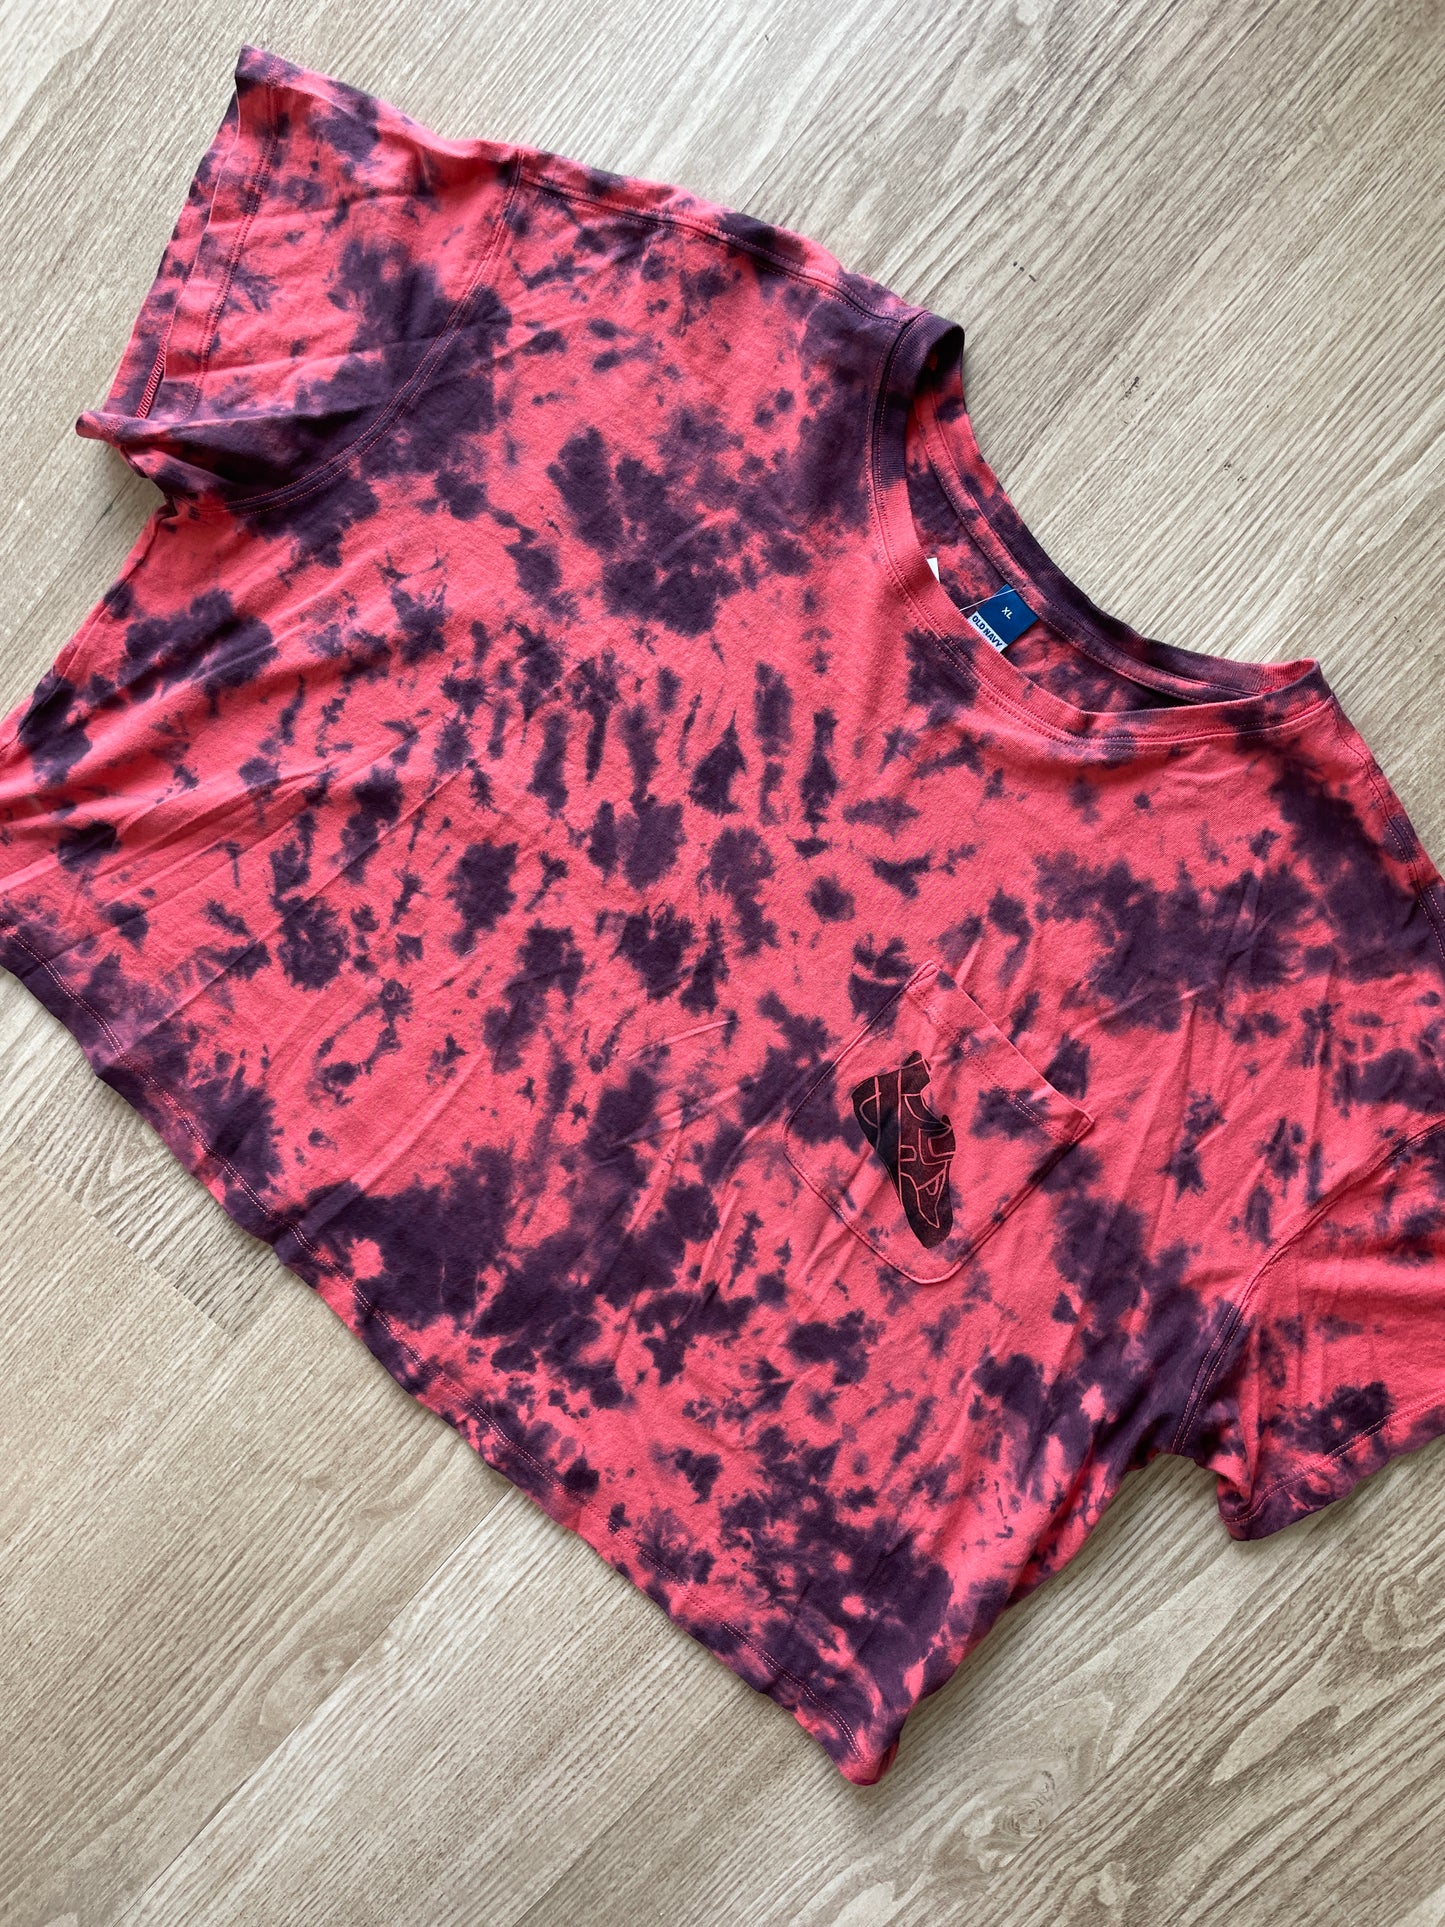 XL Women’s Climbing Shoe Handmade Tie Dyed Crop Top | One-Of-a-Kind Red and Black Cropped Short Sleeve T-Shirt